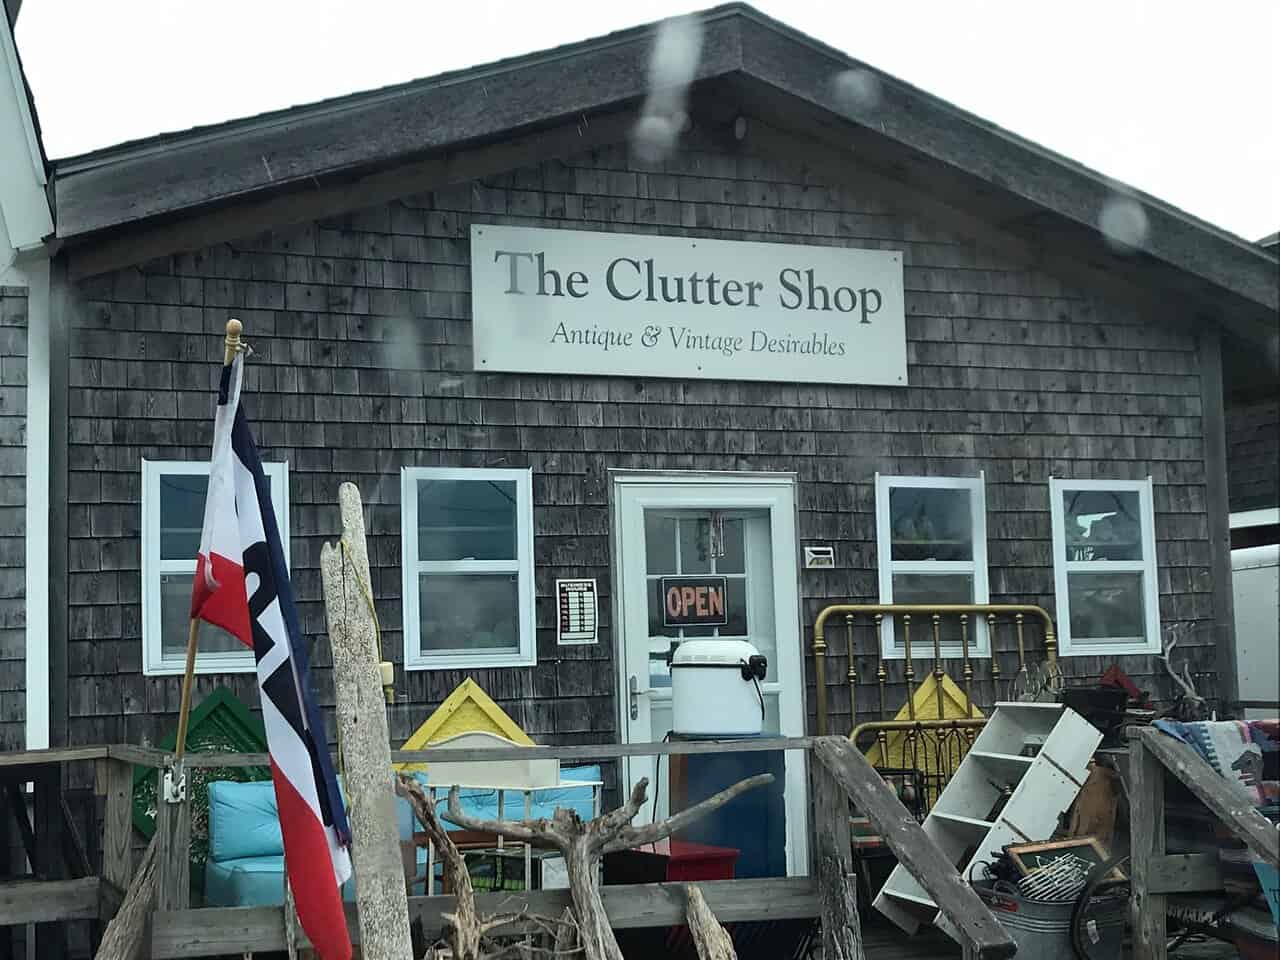 The Clutter Shop Antique and Vintage Desirables